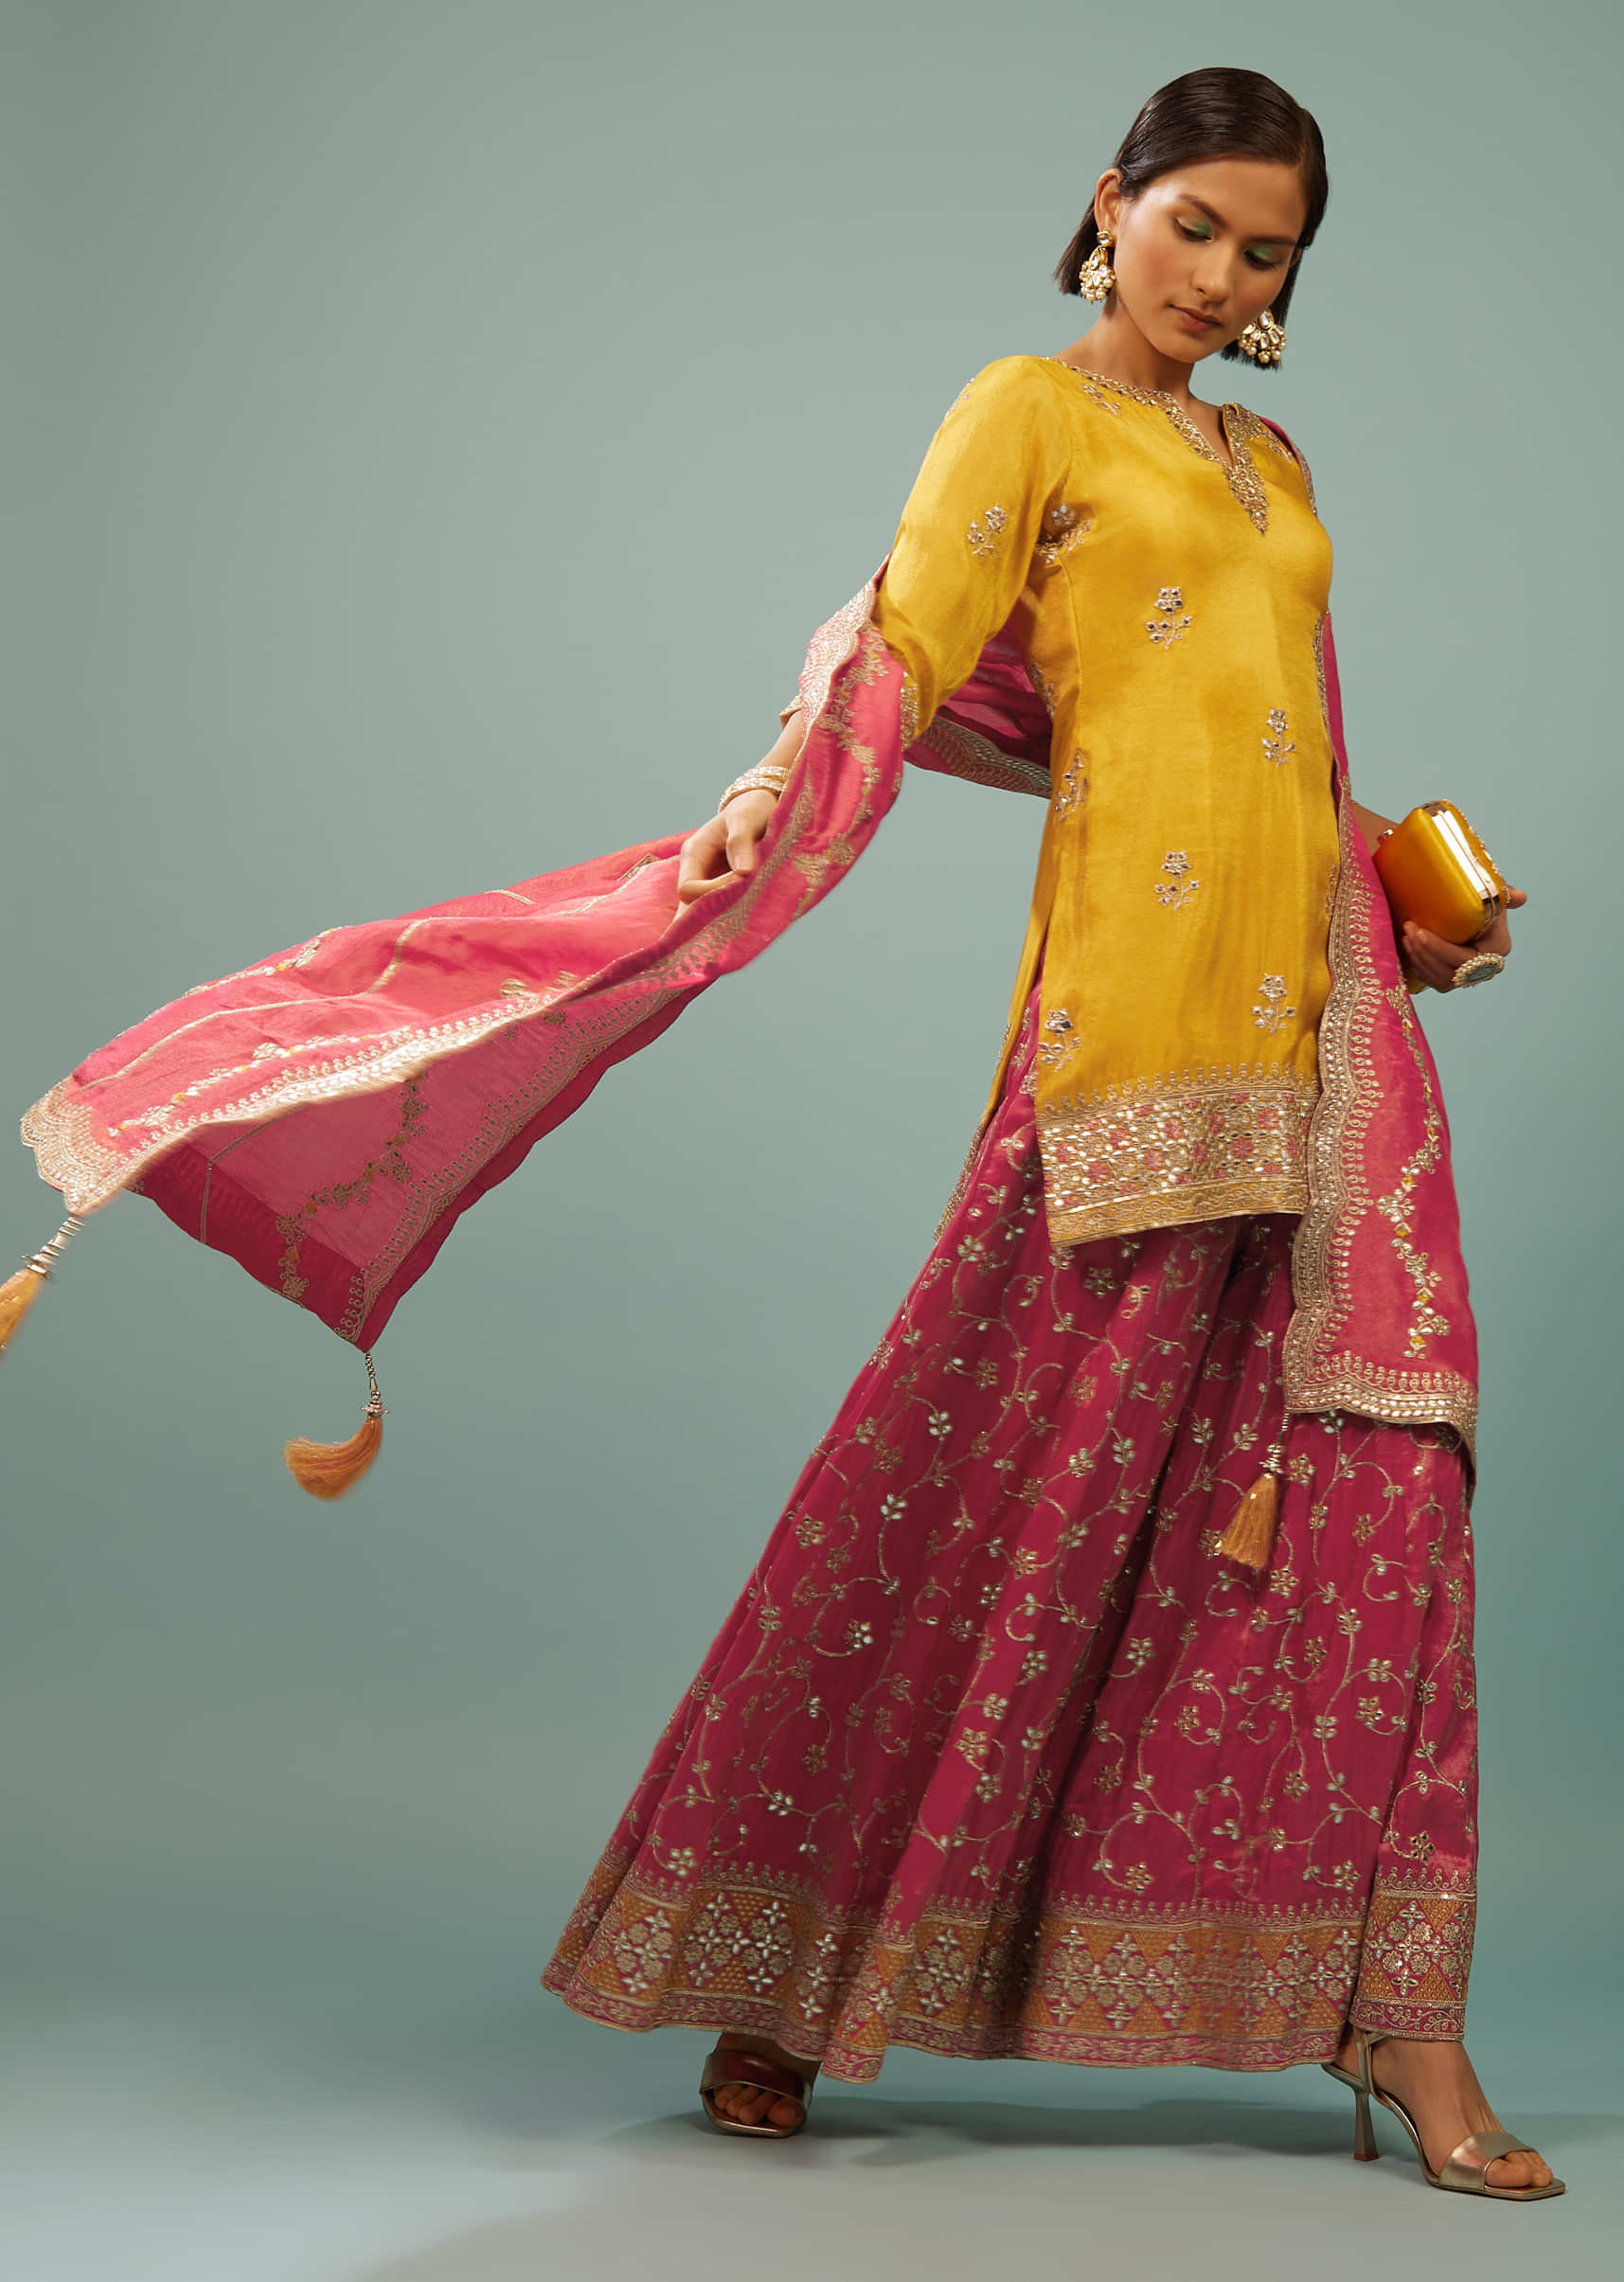 Kalki Old Gold Yellow Palazzo Suit With Embroidered Pink Palazzo & Dupatta